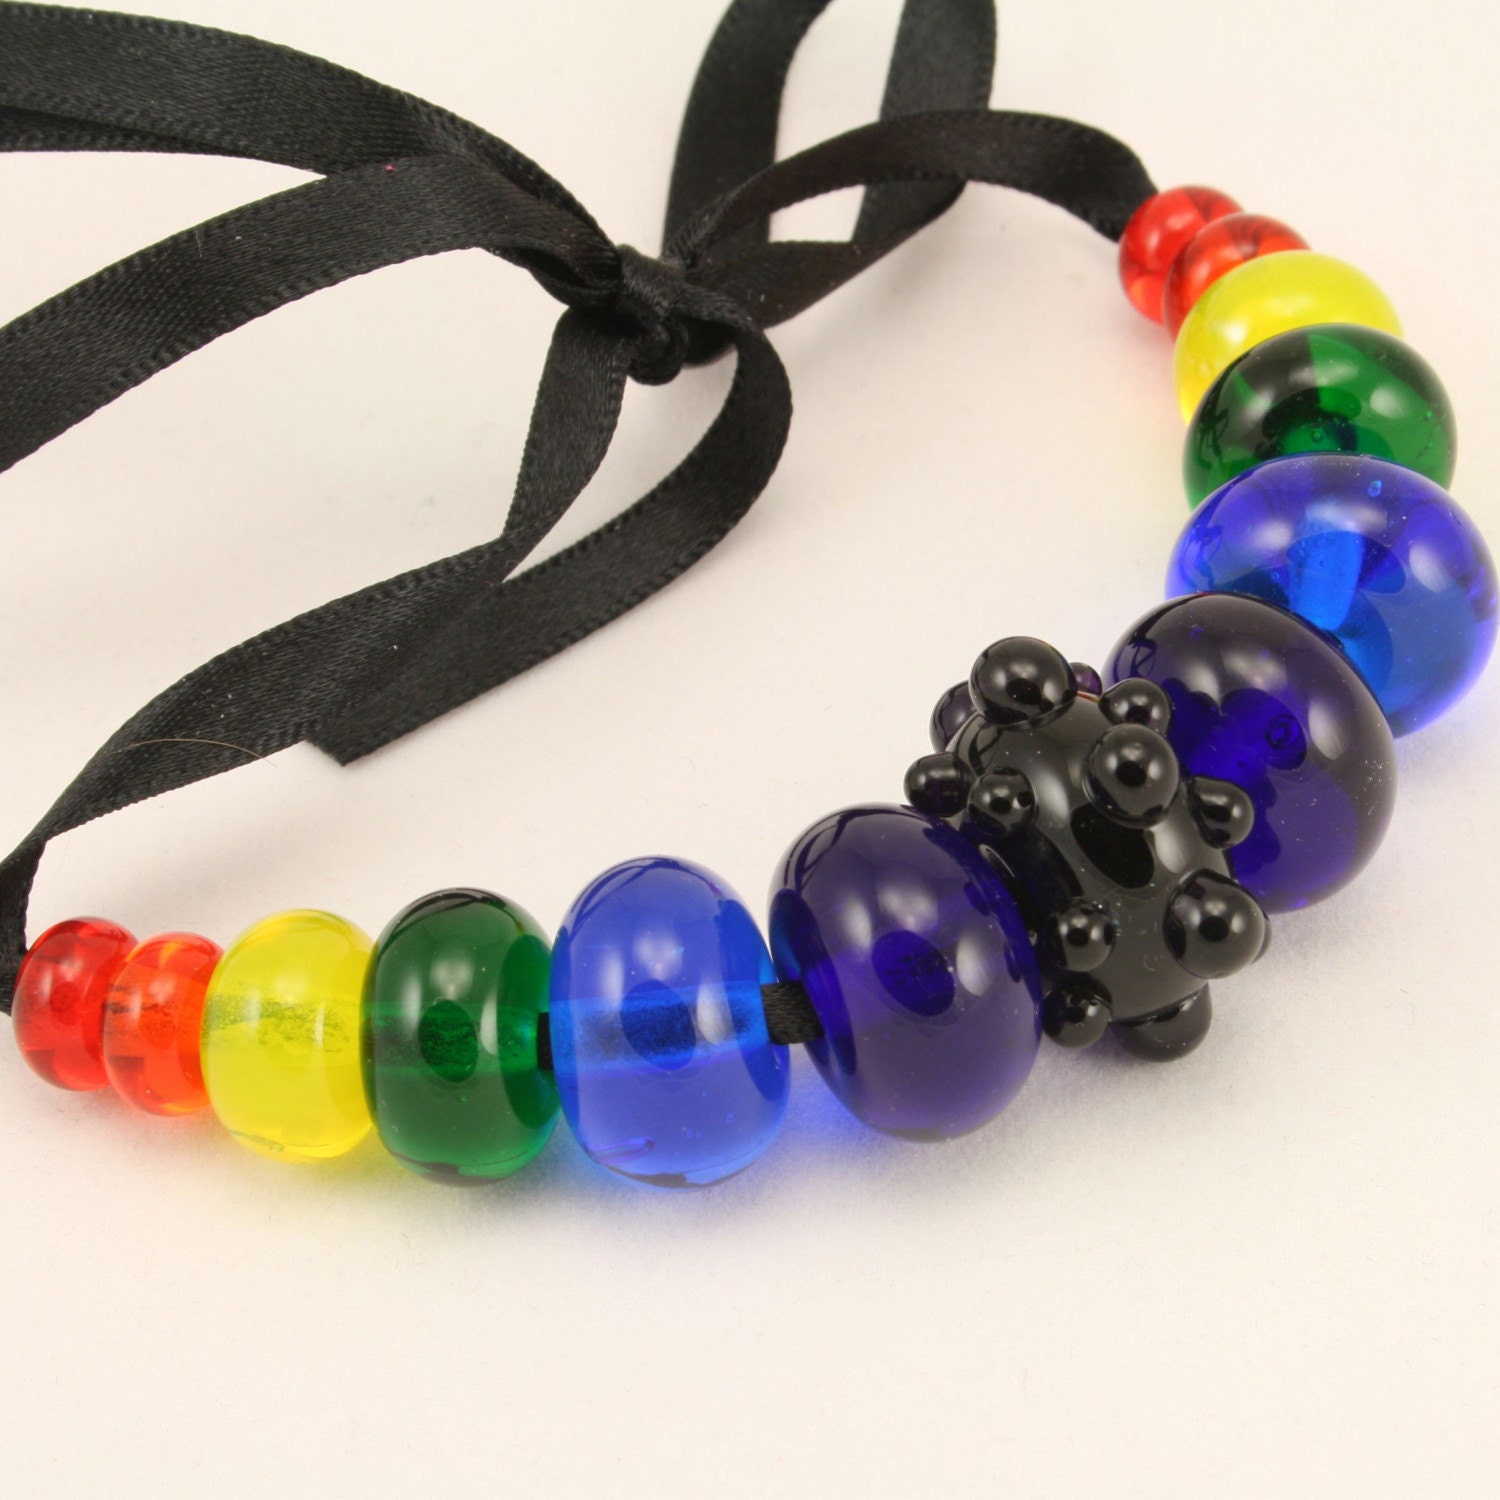 A Graduated set of 13 lampwork glass beads in a Rainbow of transparents, with a deep violet bumpy focal bead.